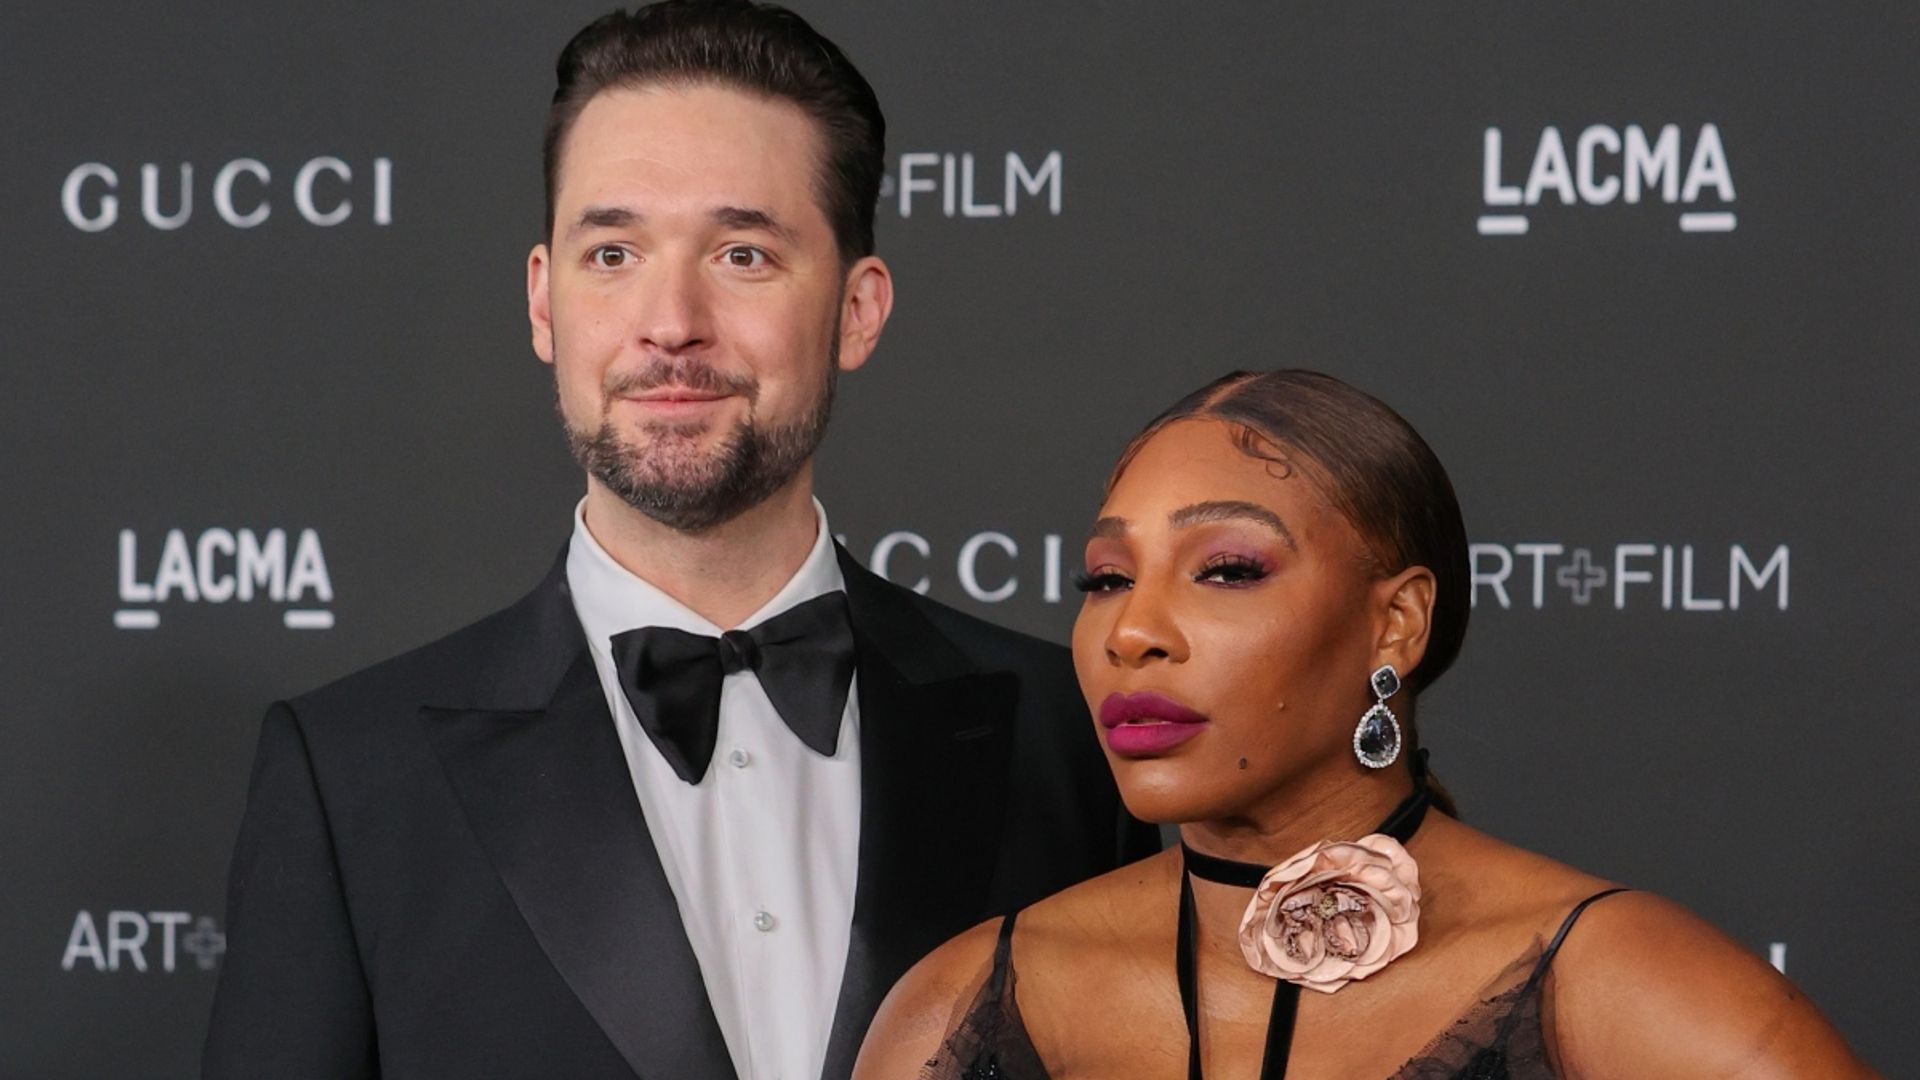 Serena Williams duels daughter Olympia in new video - and husband Alexis Ohanian's reaction is the best